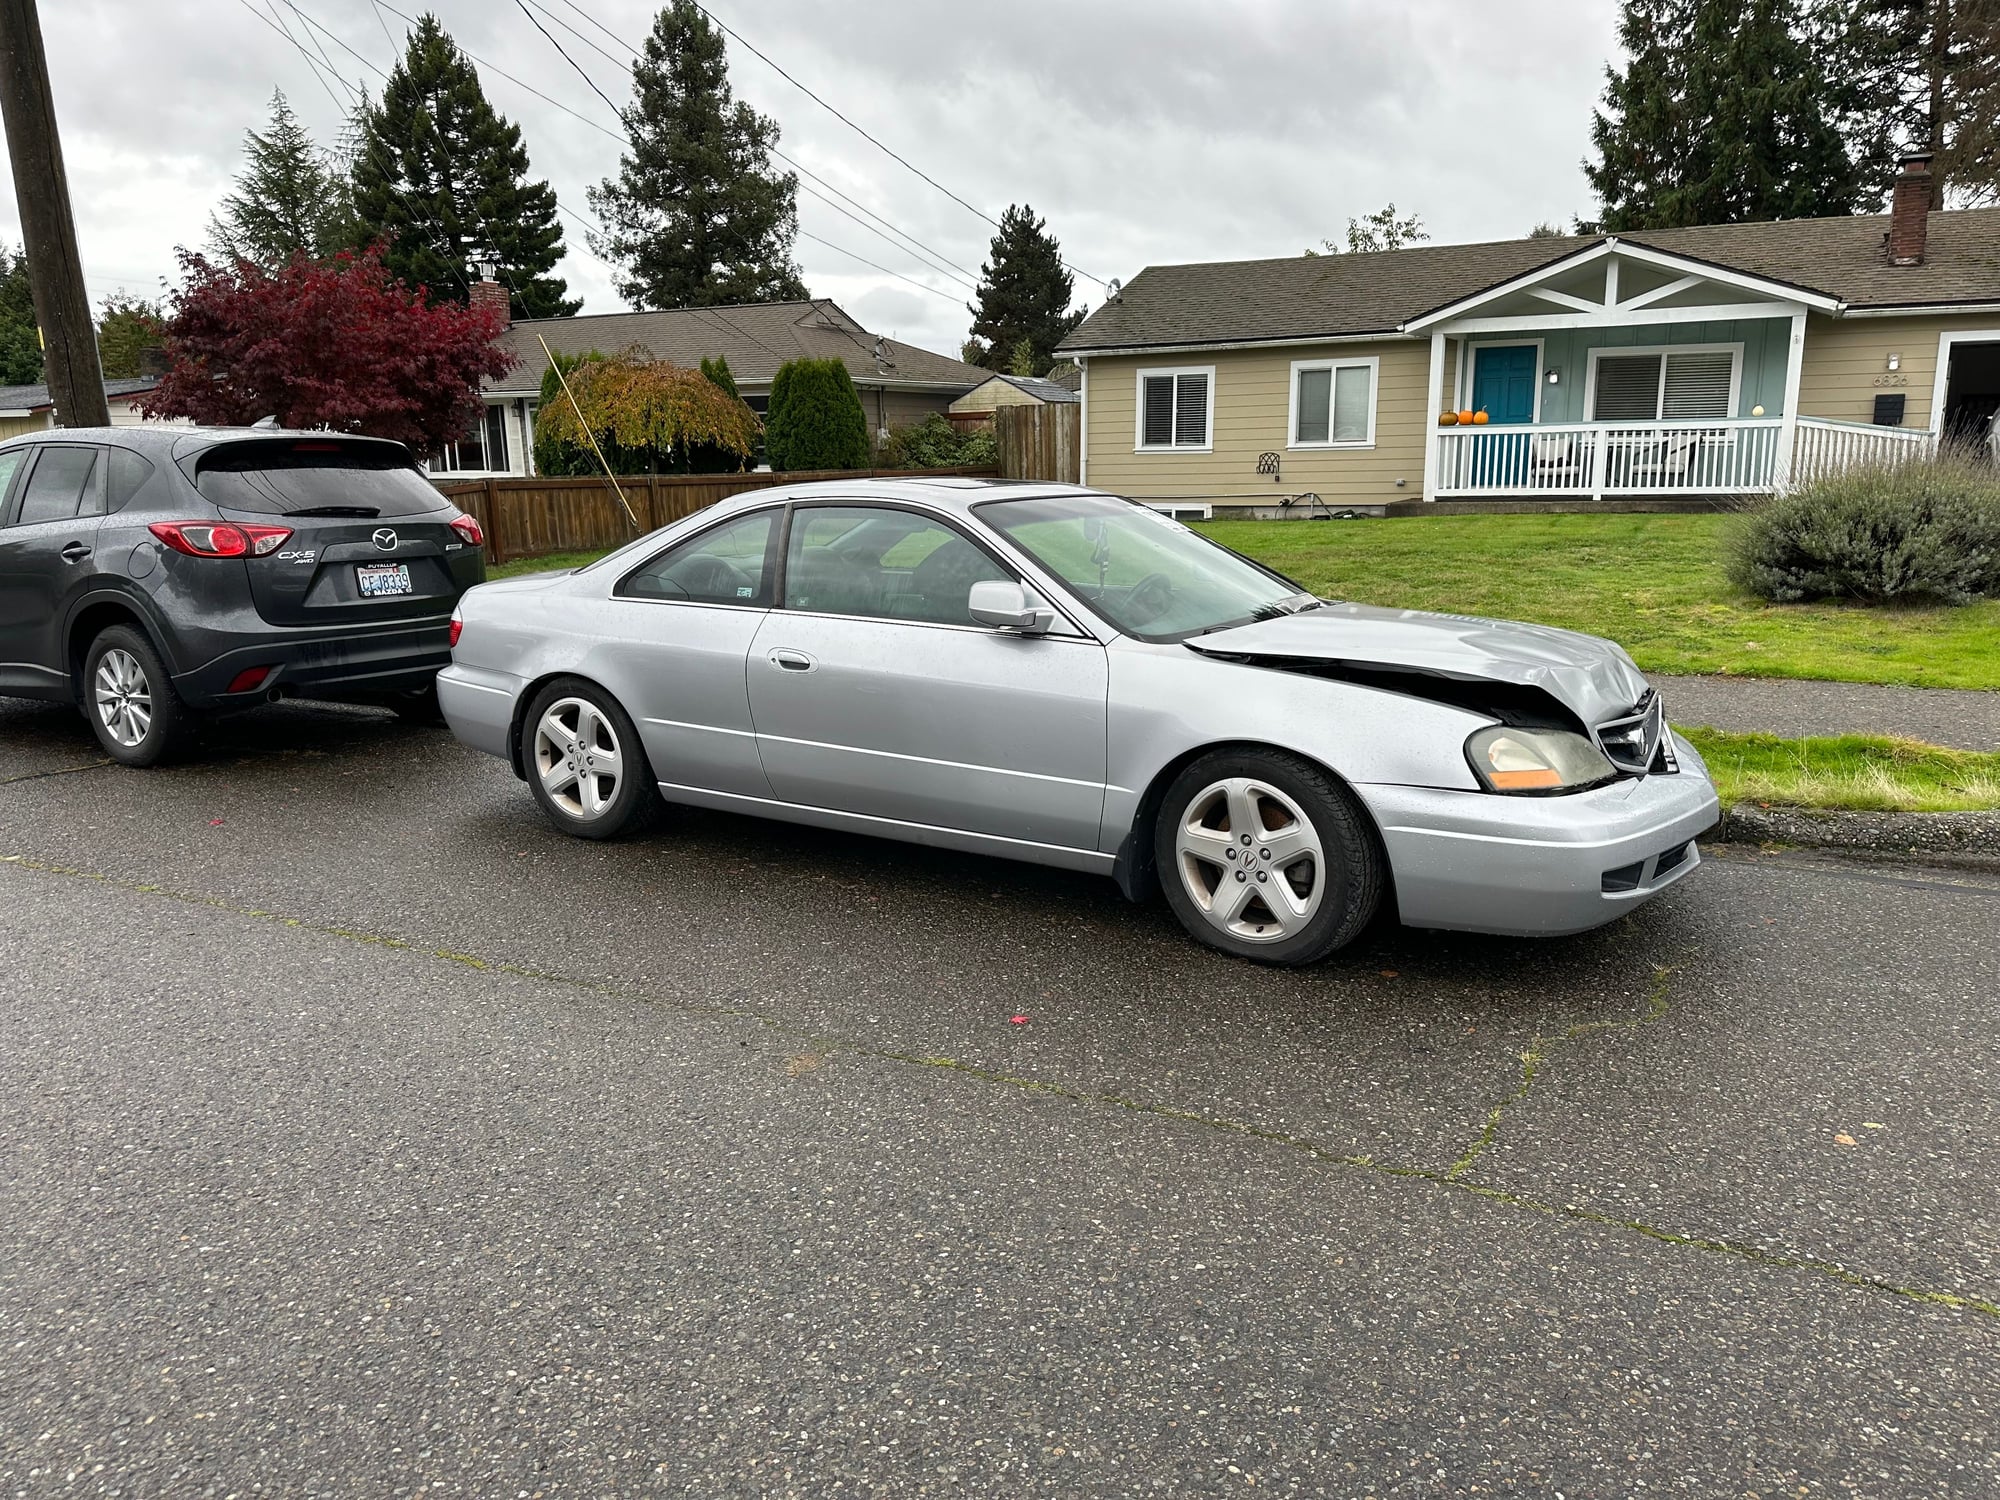 2003 Acura CL - FS: Totaled CLS6 with front end damage - Used - VIN 19UYA41643A006877 - 170,000 Miles - 6 cyl - 2WD - Manual - Coupe - Silver - Tacoma, WA 98406, United States